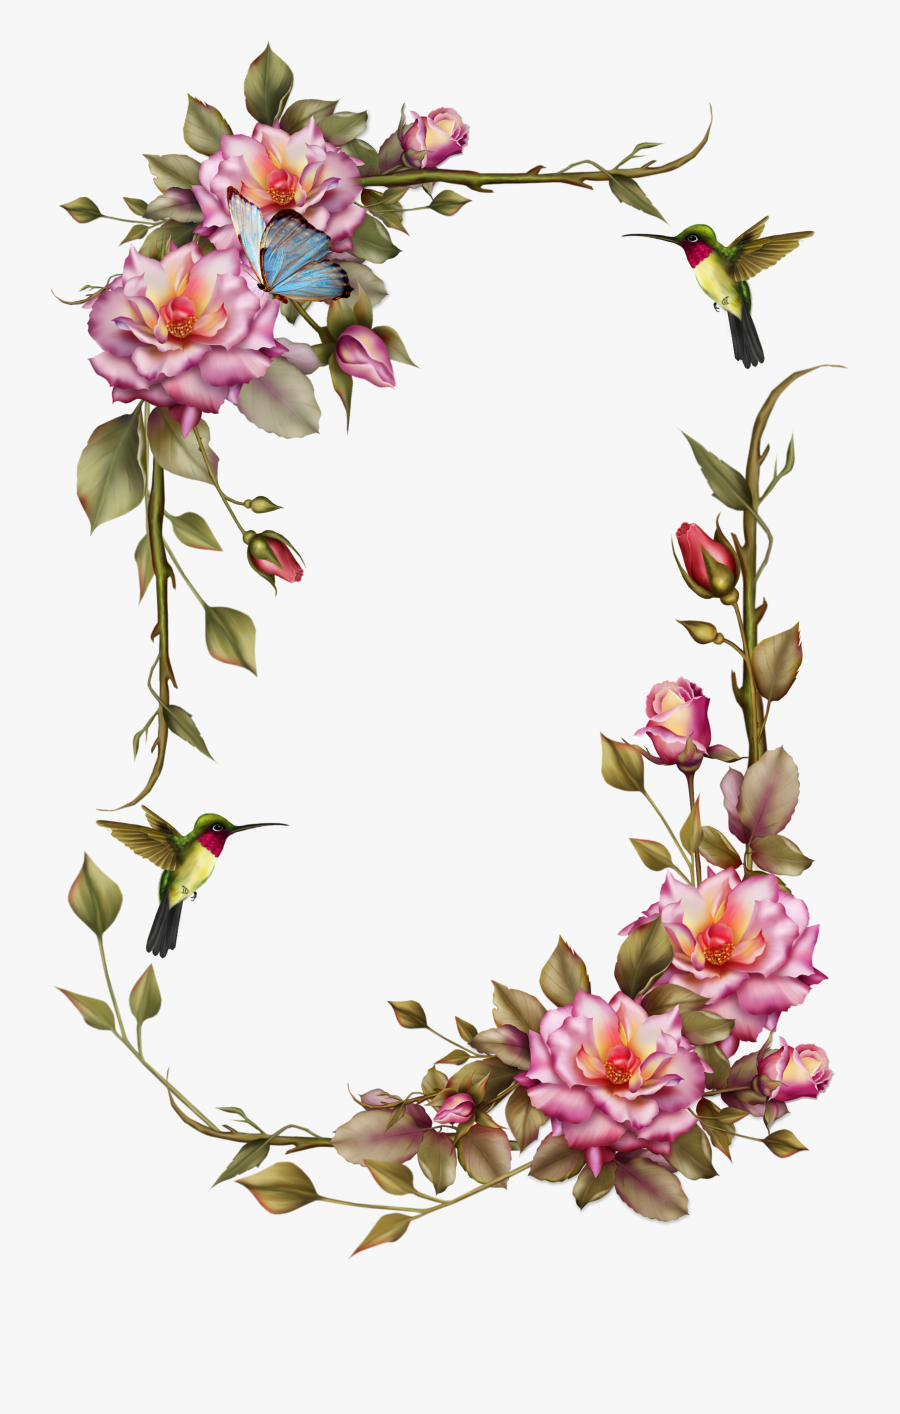 Roses And Humming Bird Frame By Collect And Creat-d6a4rod - Happy Birthday Frame Flowers, Transparent Clipart